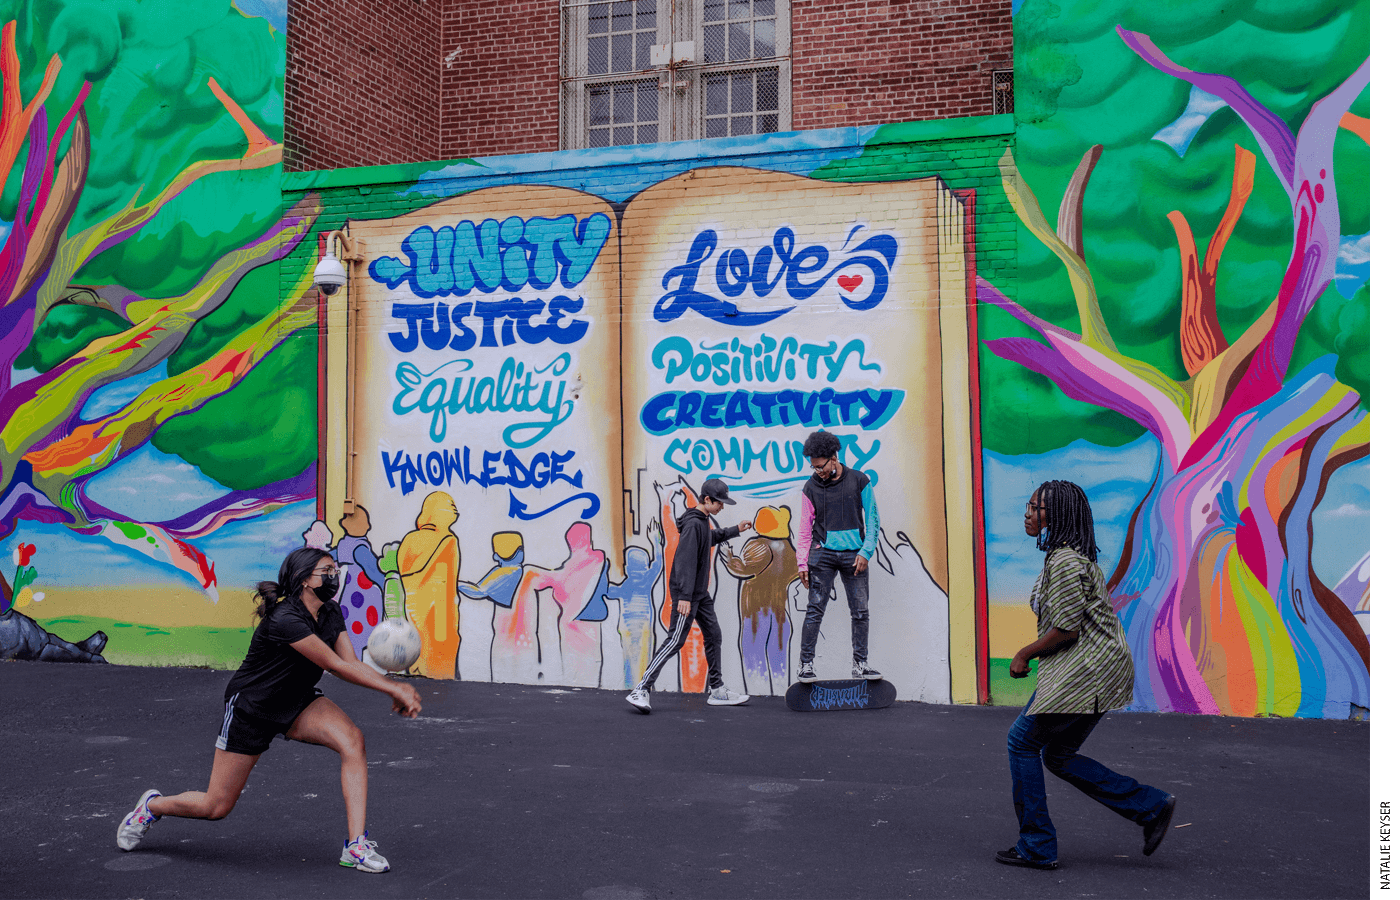 Students play in the school yard of Manhattan’s Bard High School Early College during recess. The mural behind them was painted by Elroy Gay and his team. Students chose the eight words at the mural’s center, which represent important ideas and their core values.